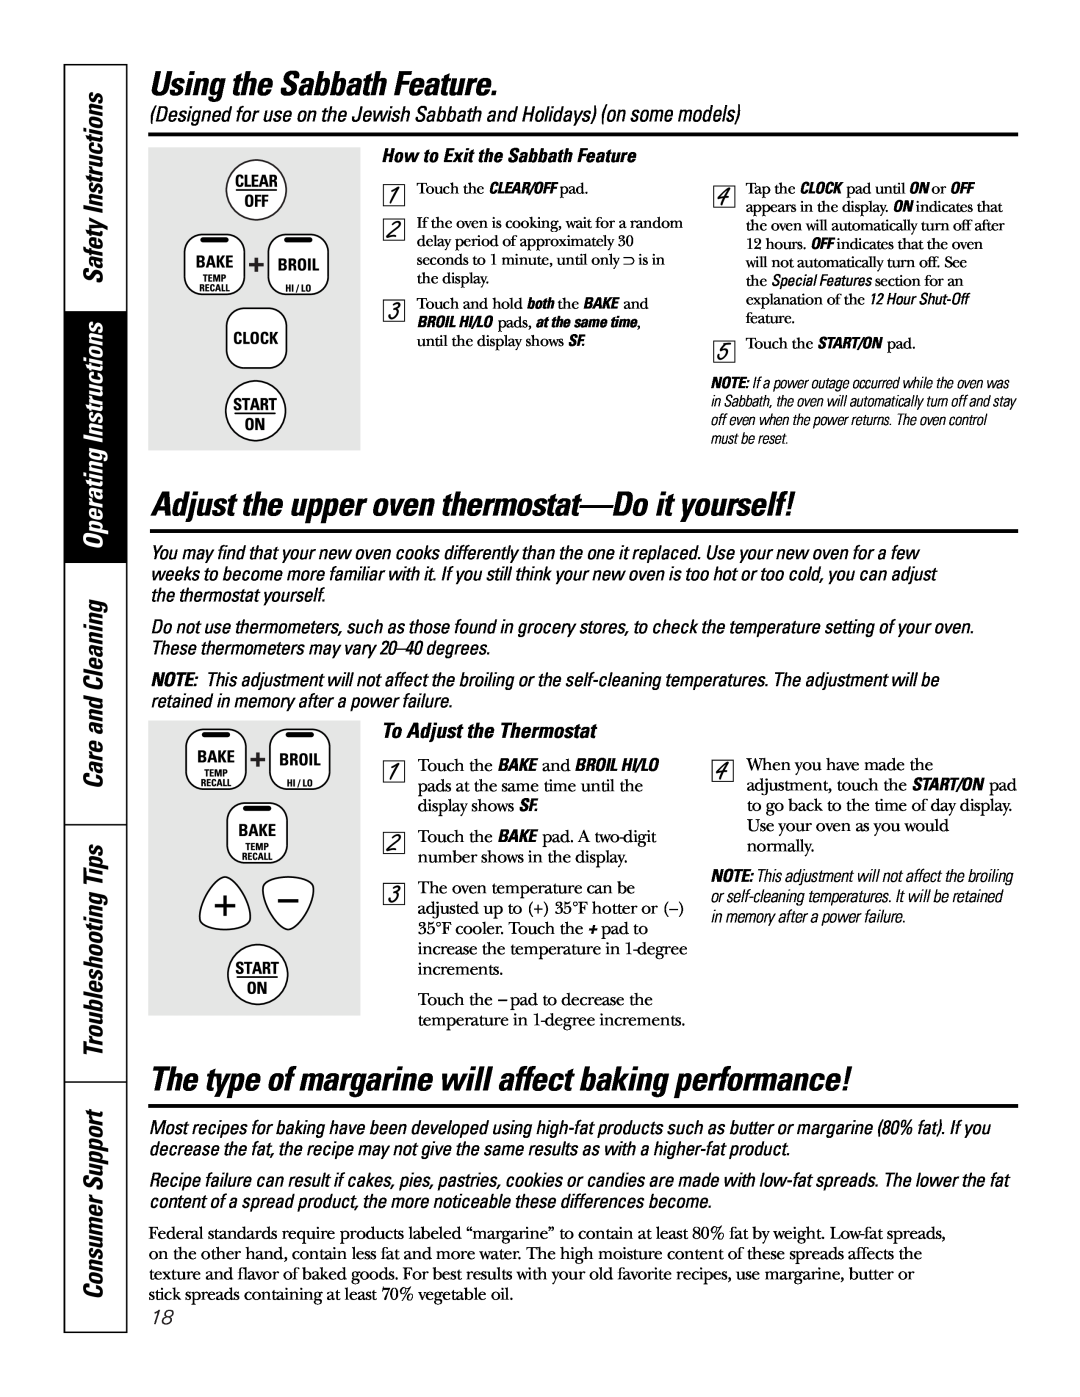 GE JBP89 owner manual To Adjust the Thermostat, Using the Sabbath Feature, Consumer Support 